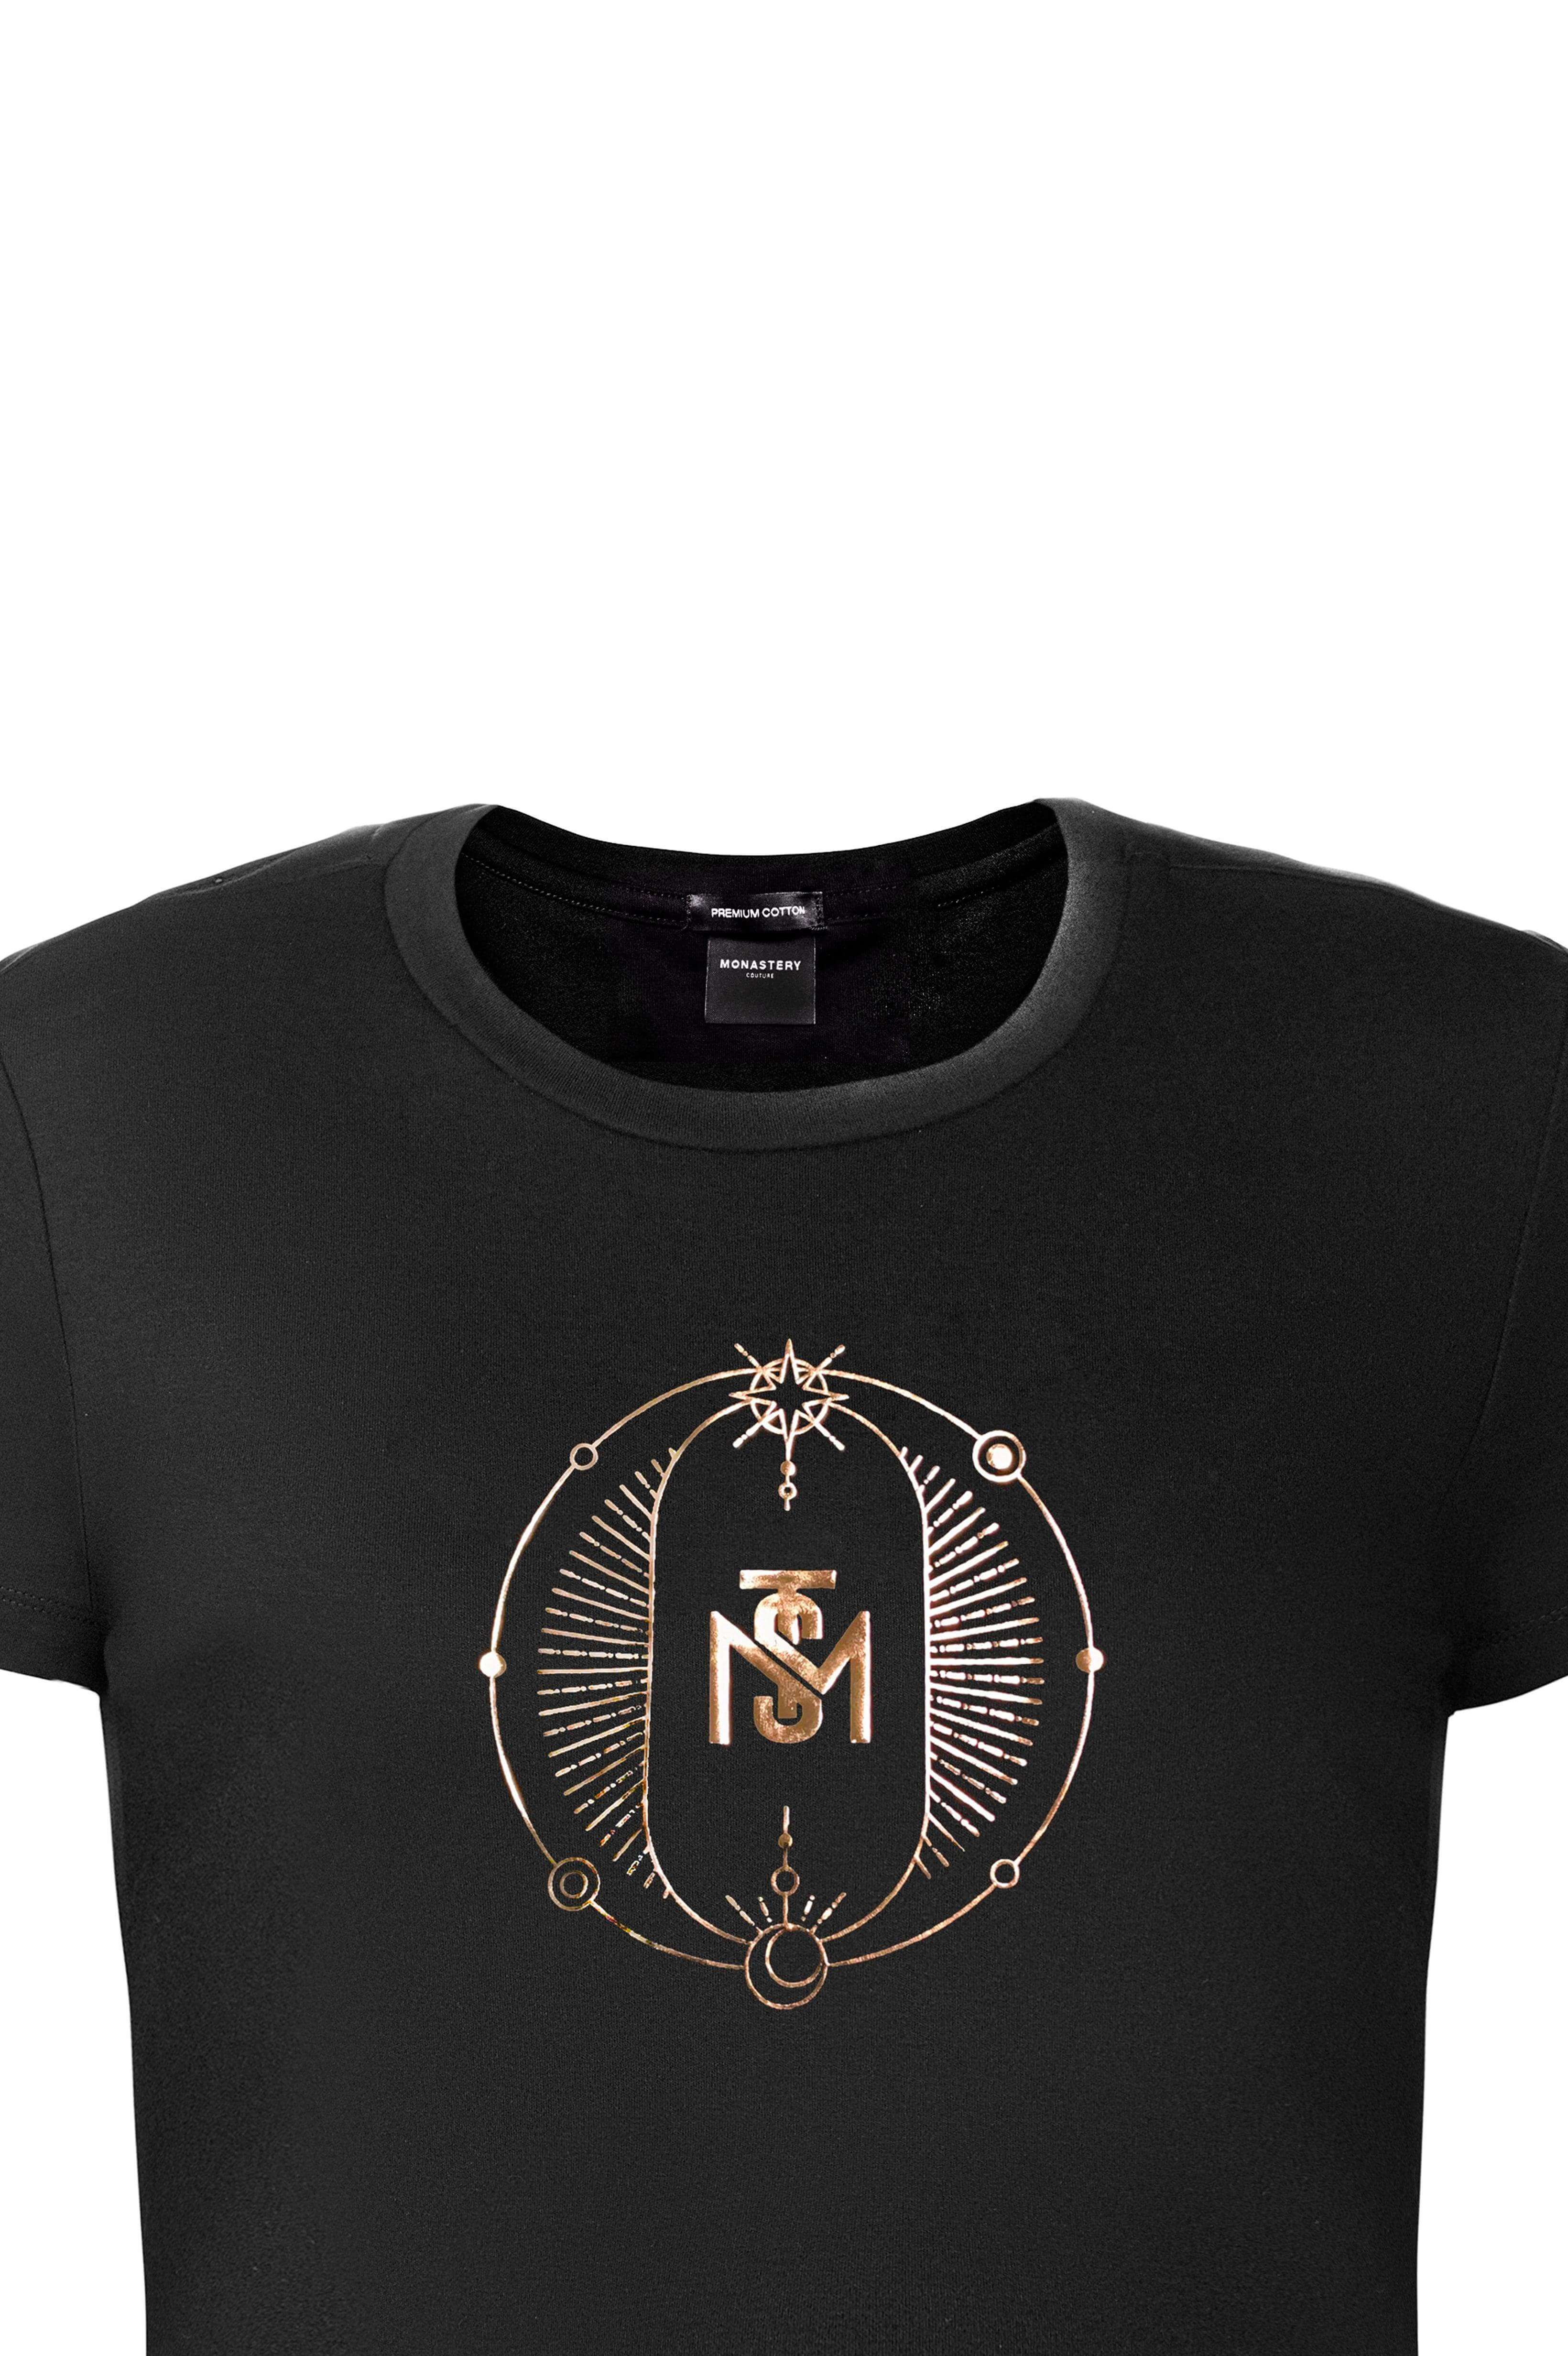 ANNECY T-SHIRT BLACK | Monastery Couture